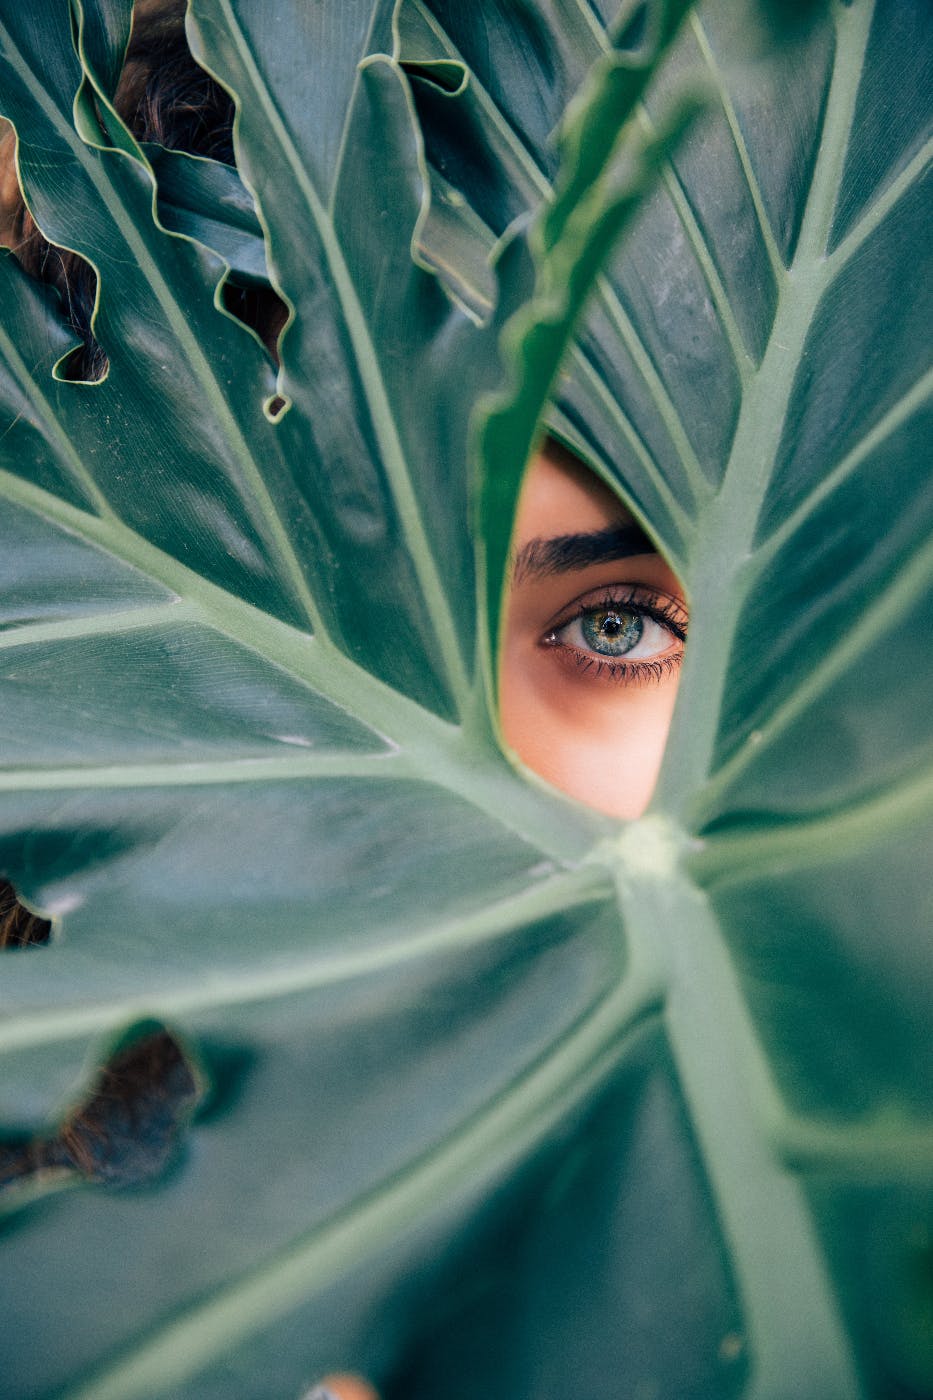 A woman's crystal blue eye looking out from behind lartge leaves